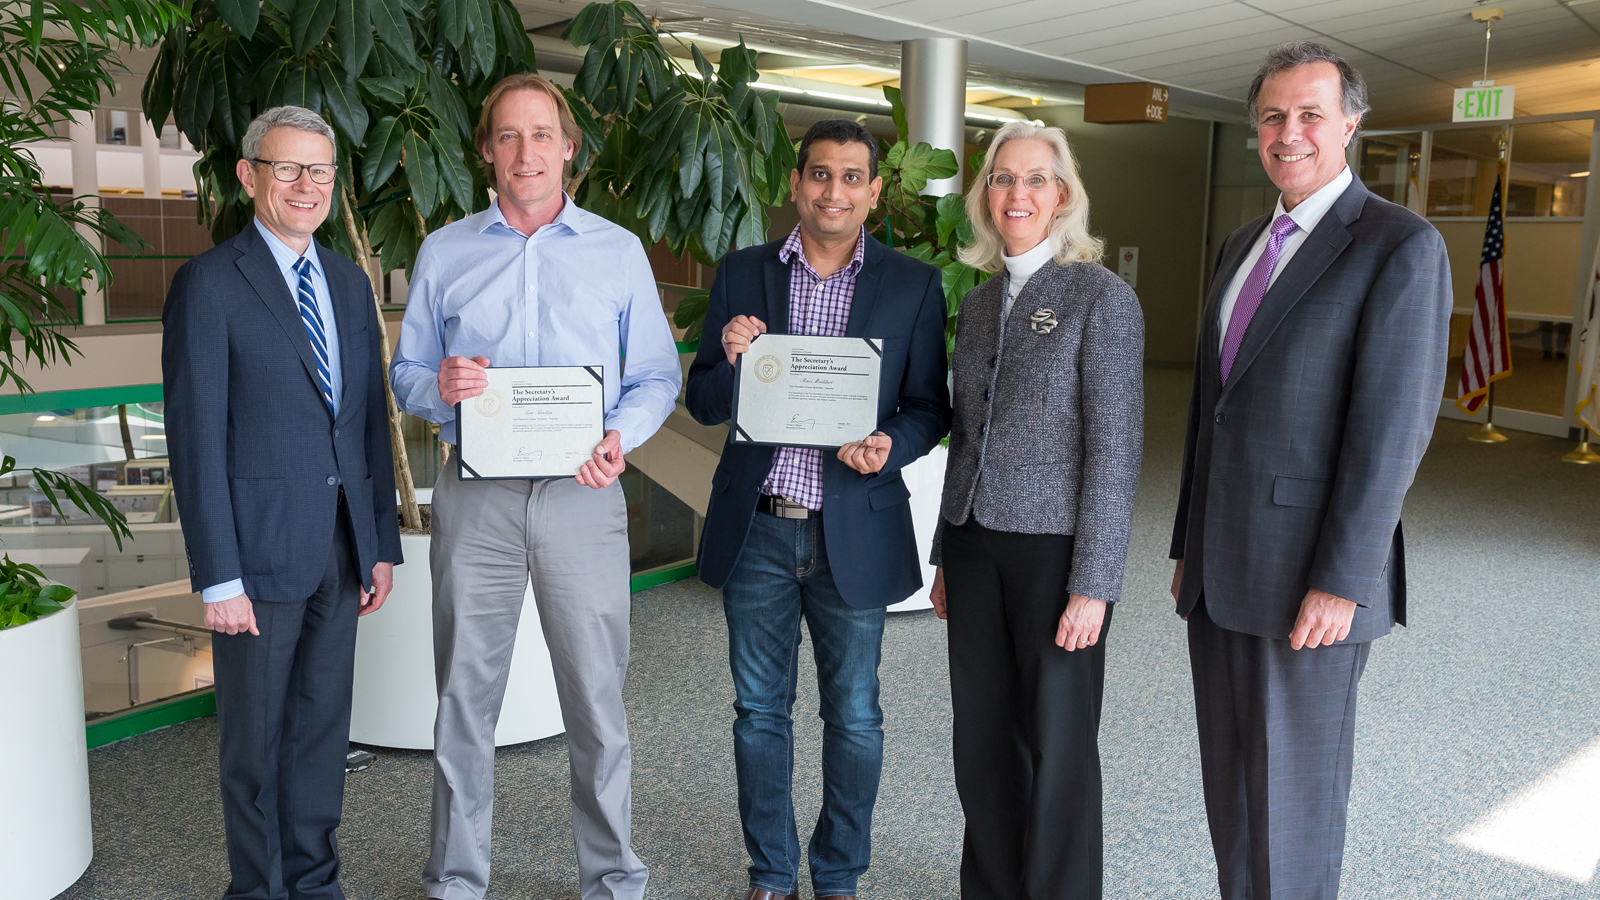 Argonne Computer Scientists Tom Brettin and Ravi Madduri also received awards for their work with the Cancer Moonshot Task Force. 